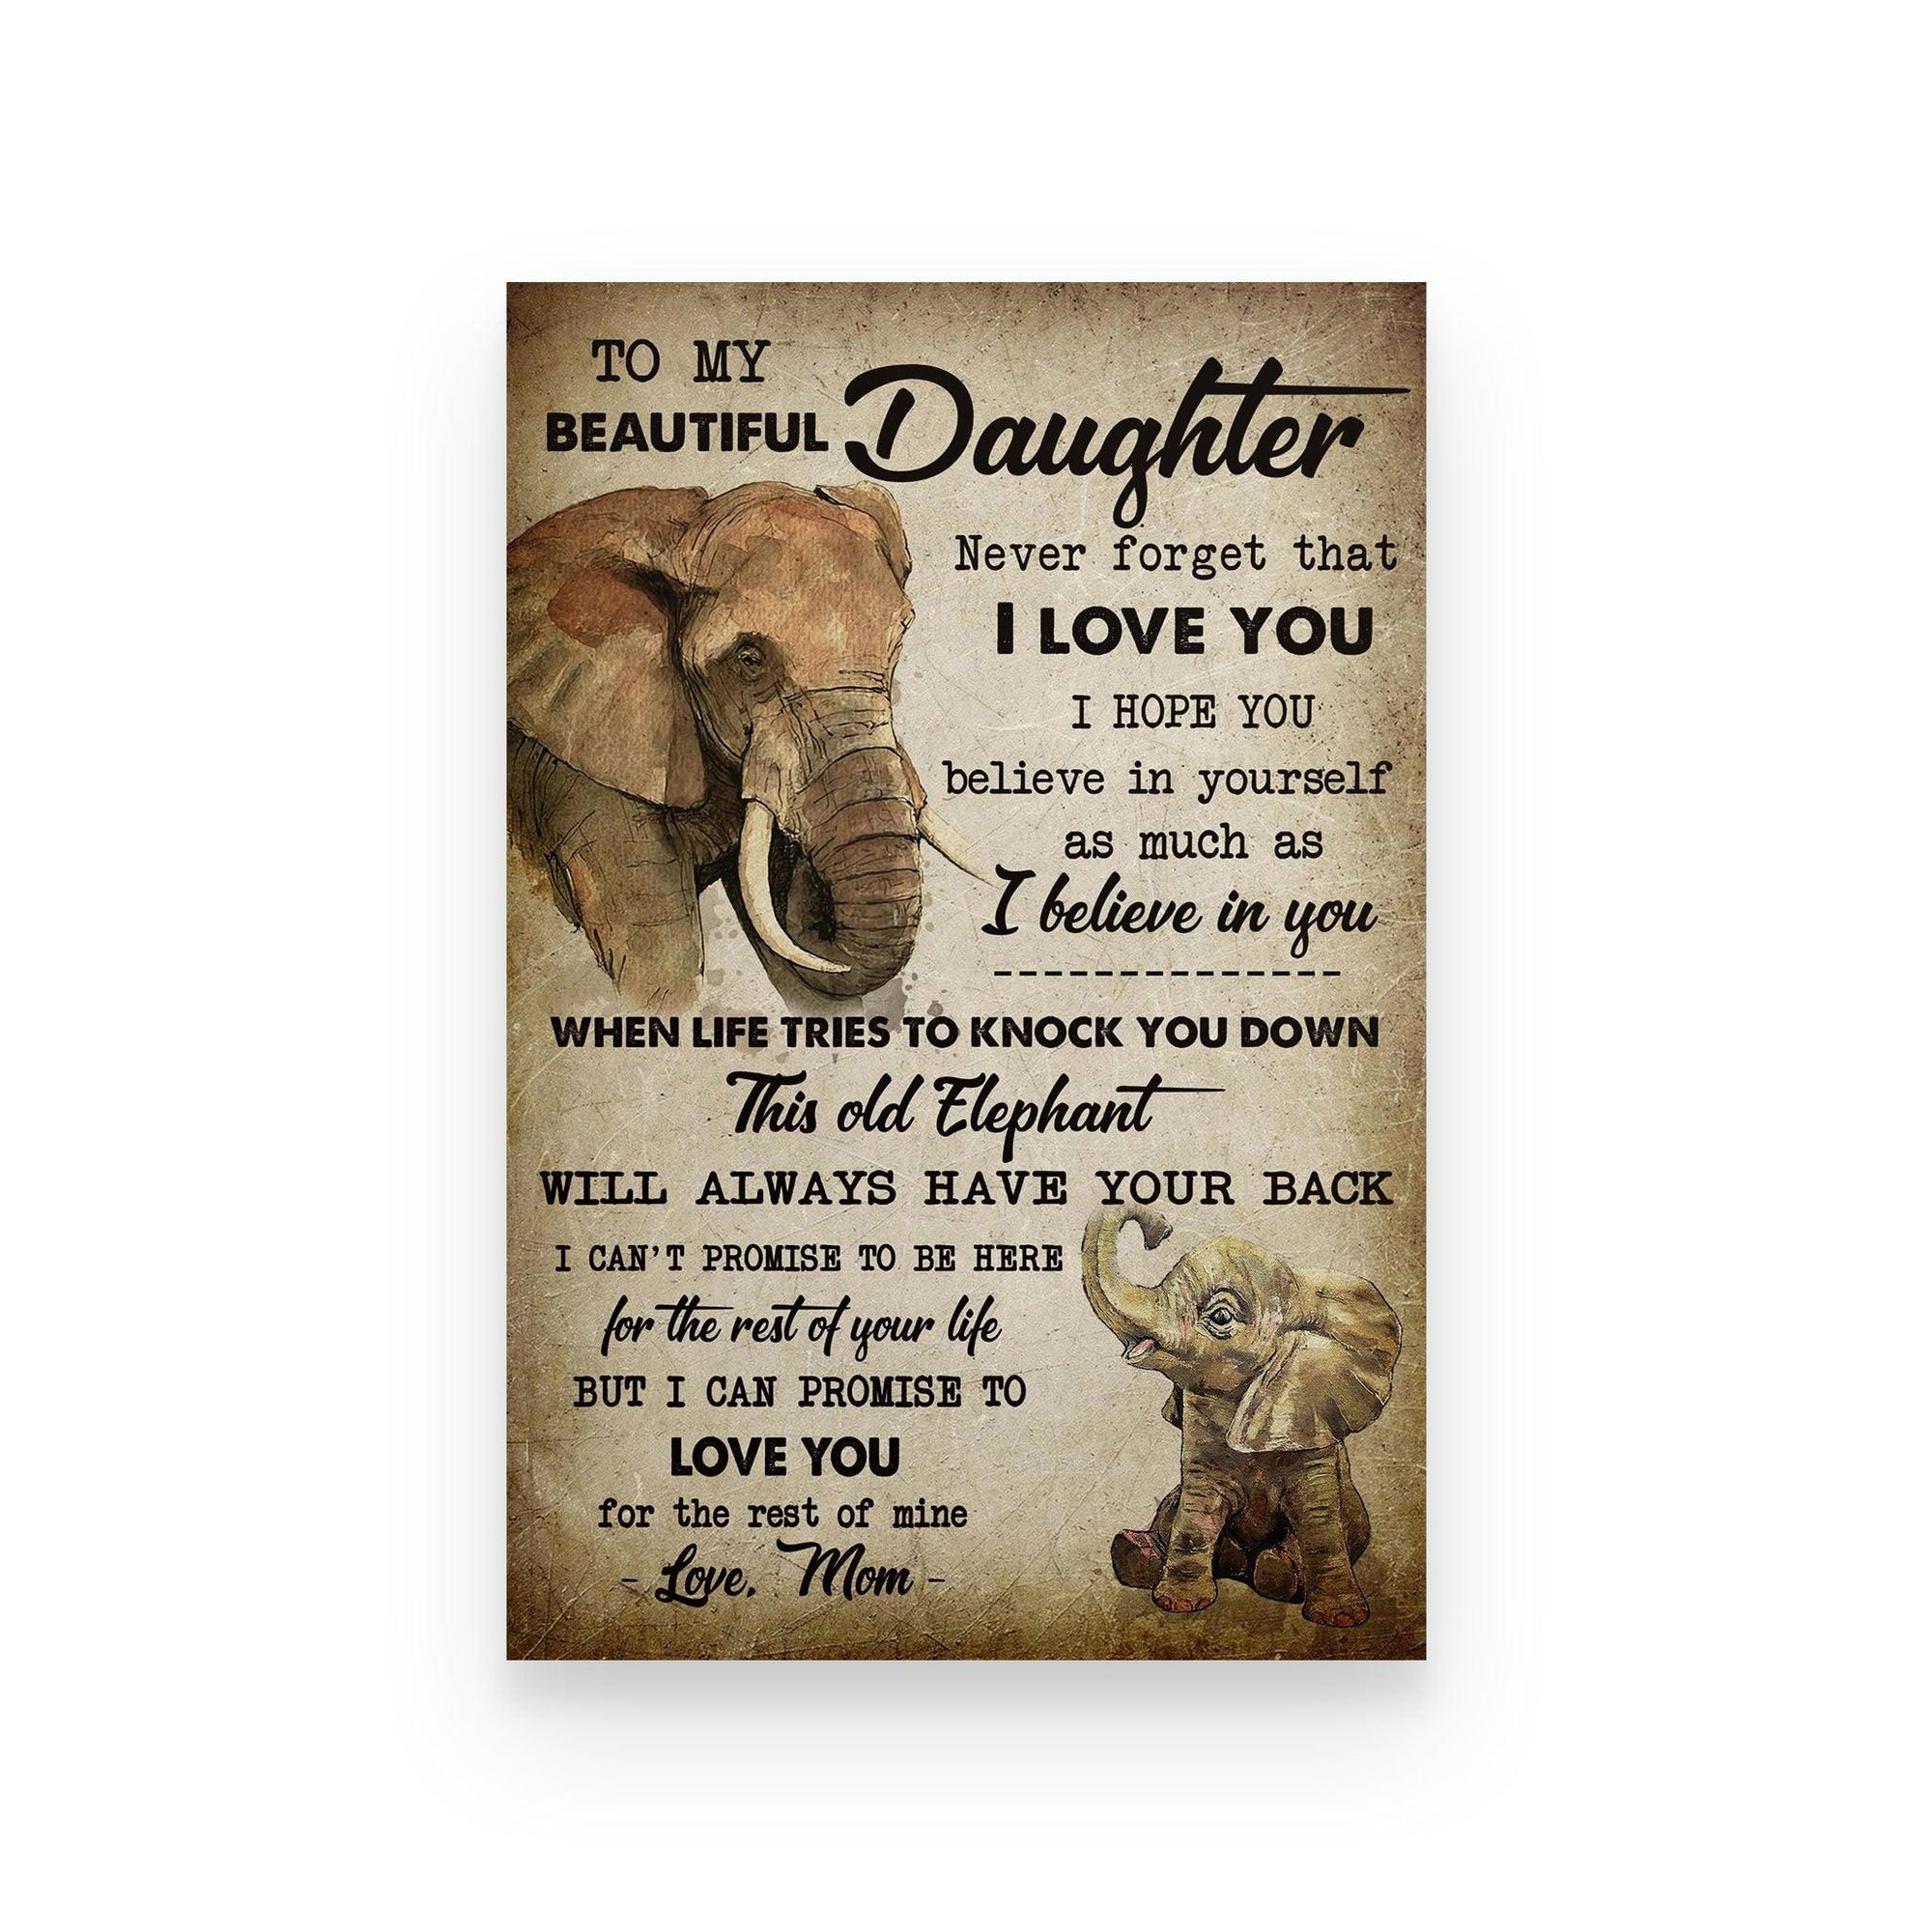 To My Daughter Portrait Canvas - Elephant To My Beautiful Daughter Love You For The Rest Of Mine Portrait Canvas - Best Gift For Daughter - Amzanimalsgift